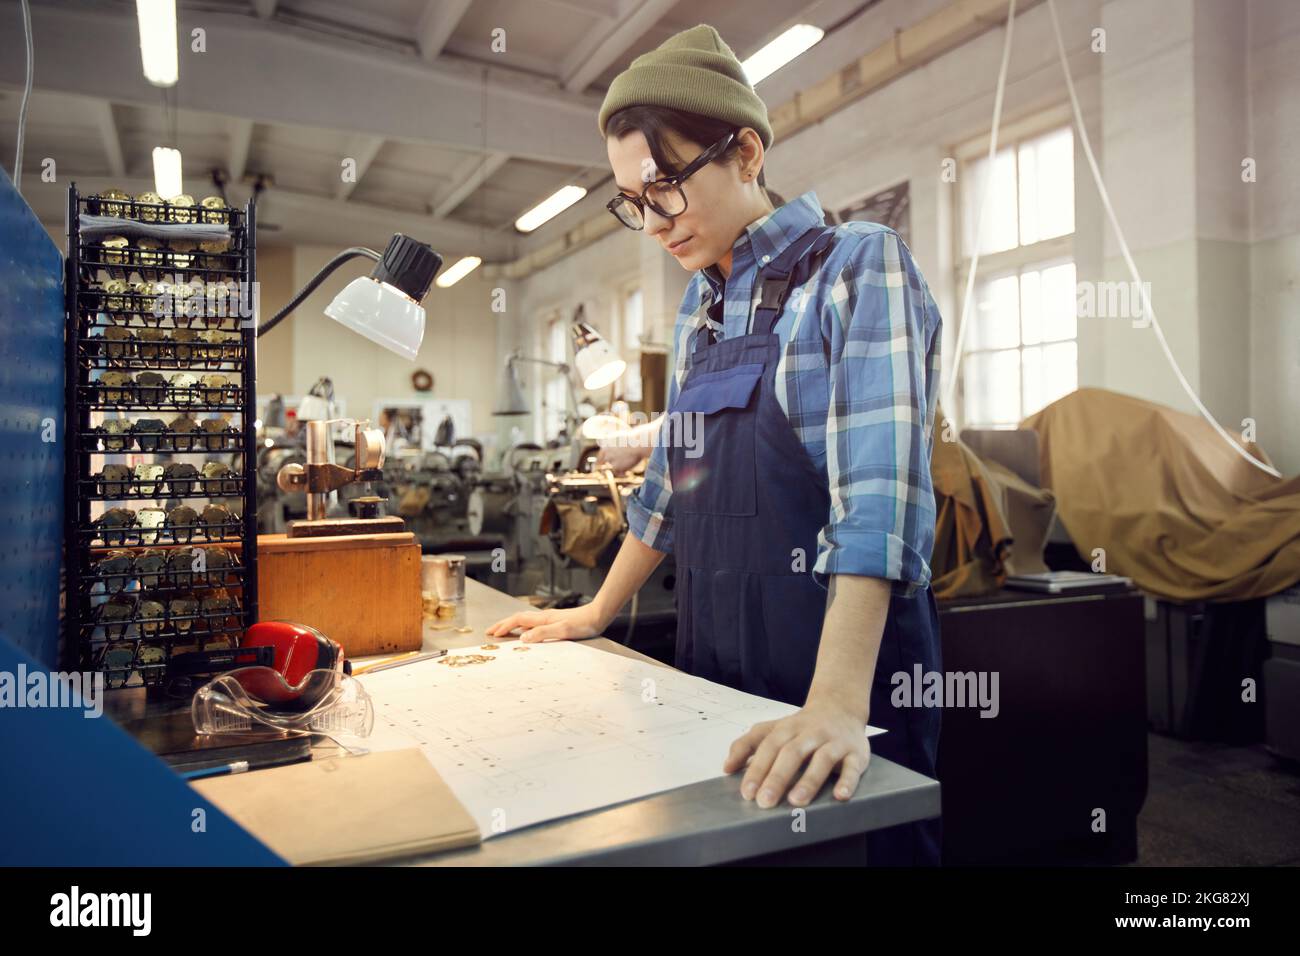 Serious concentrated young woman in workwear standing at table and watching assembly plan of watch movement Stock Photo